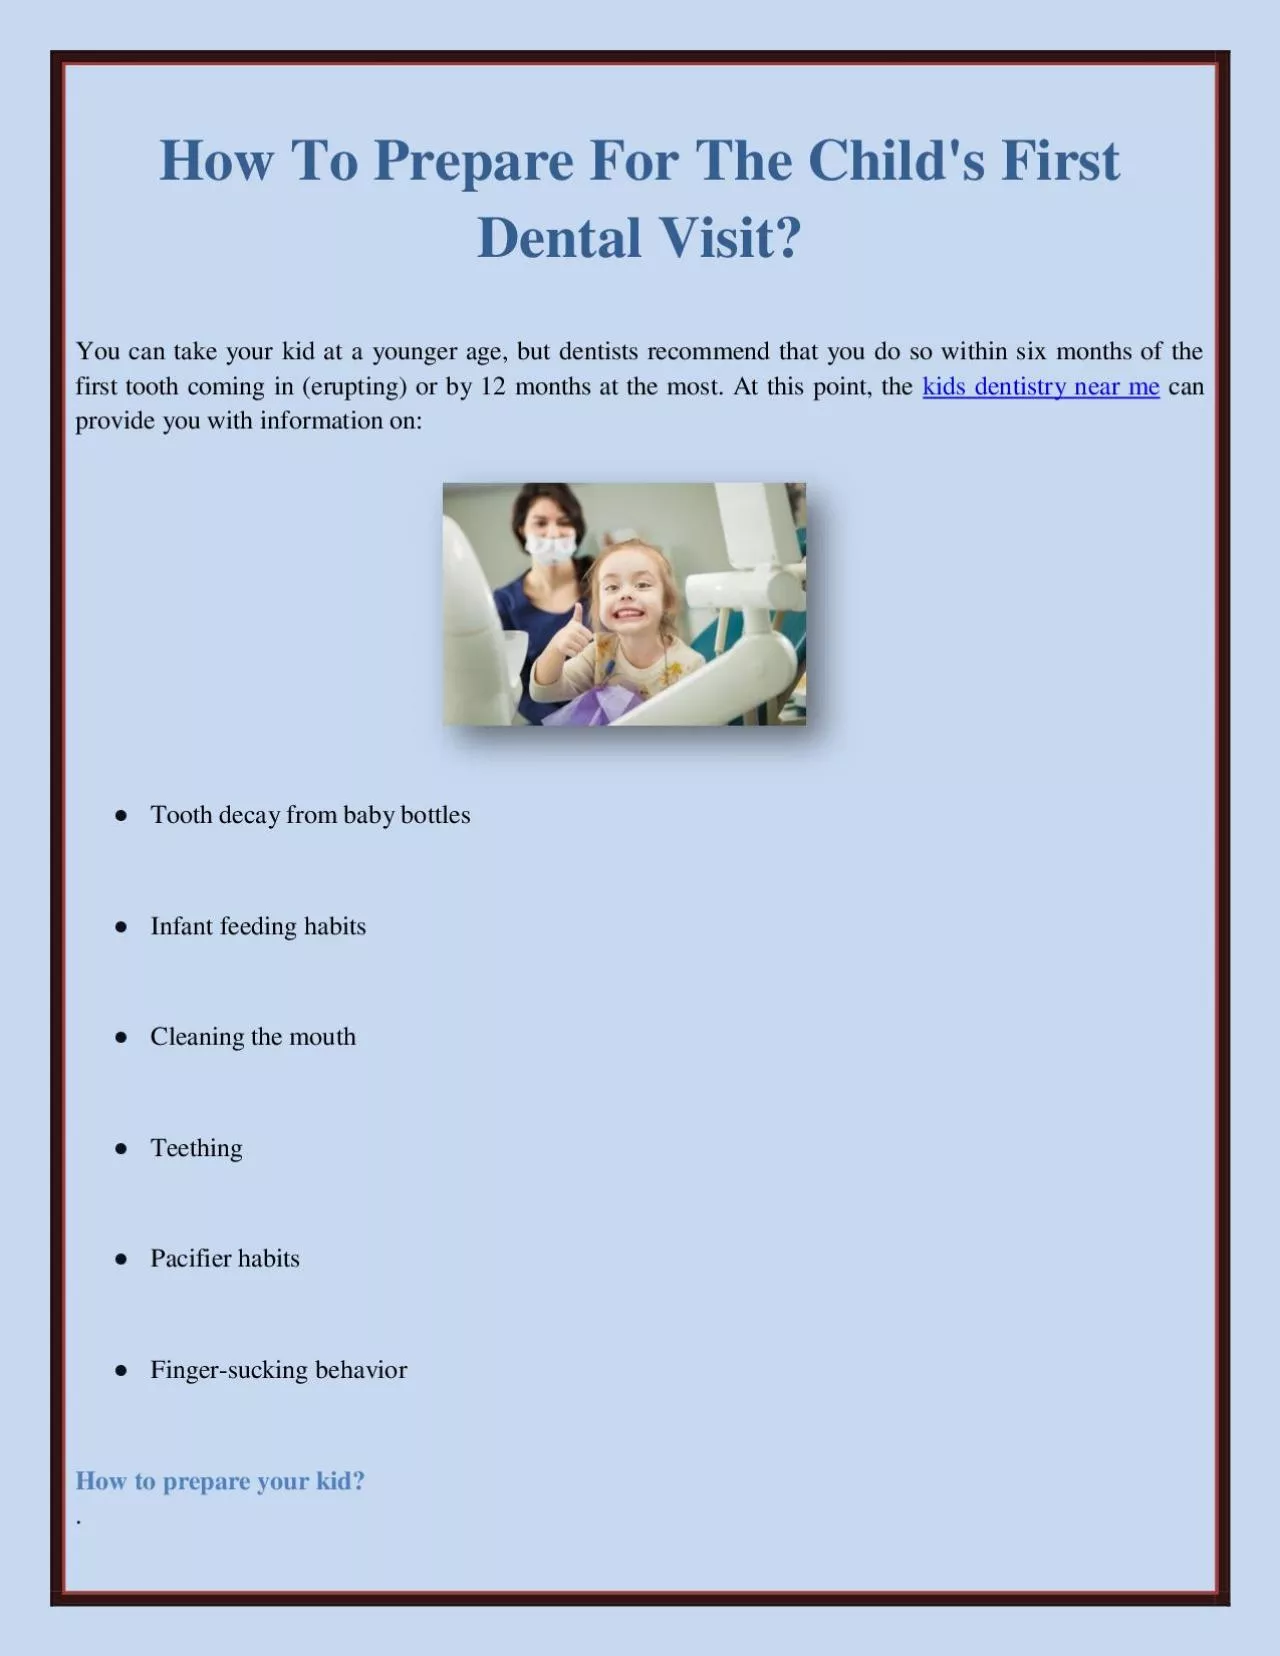 How To Prepare For The Child\'s First Dental Visit?